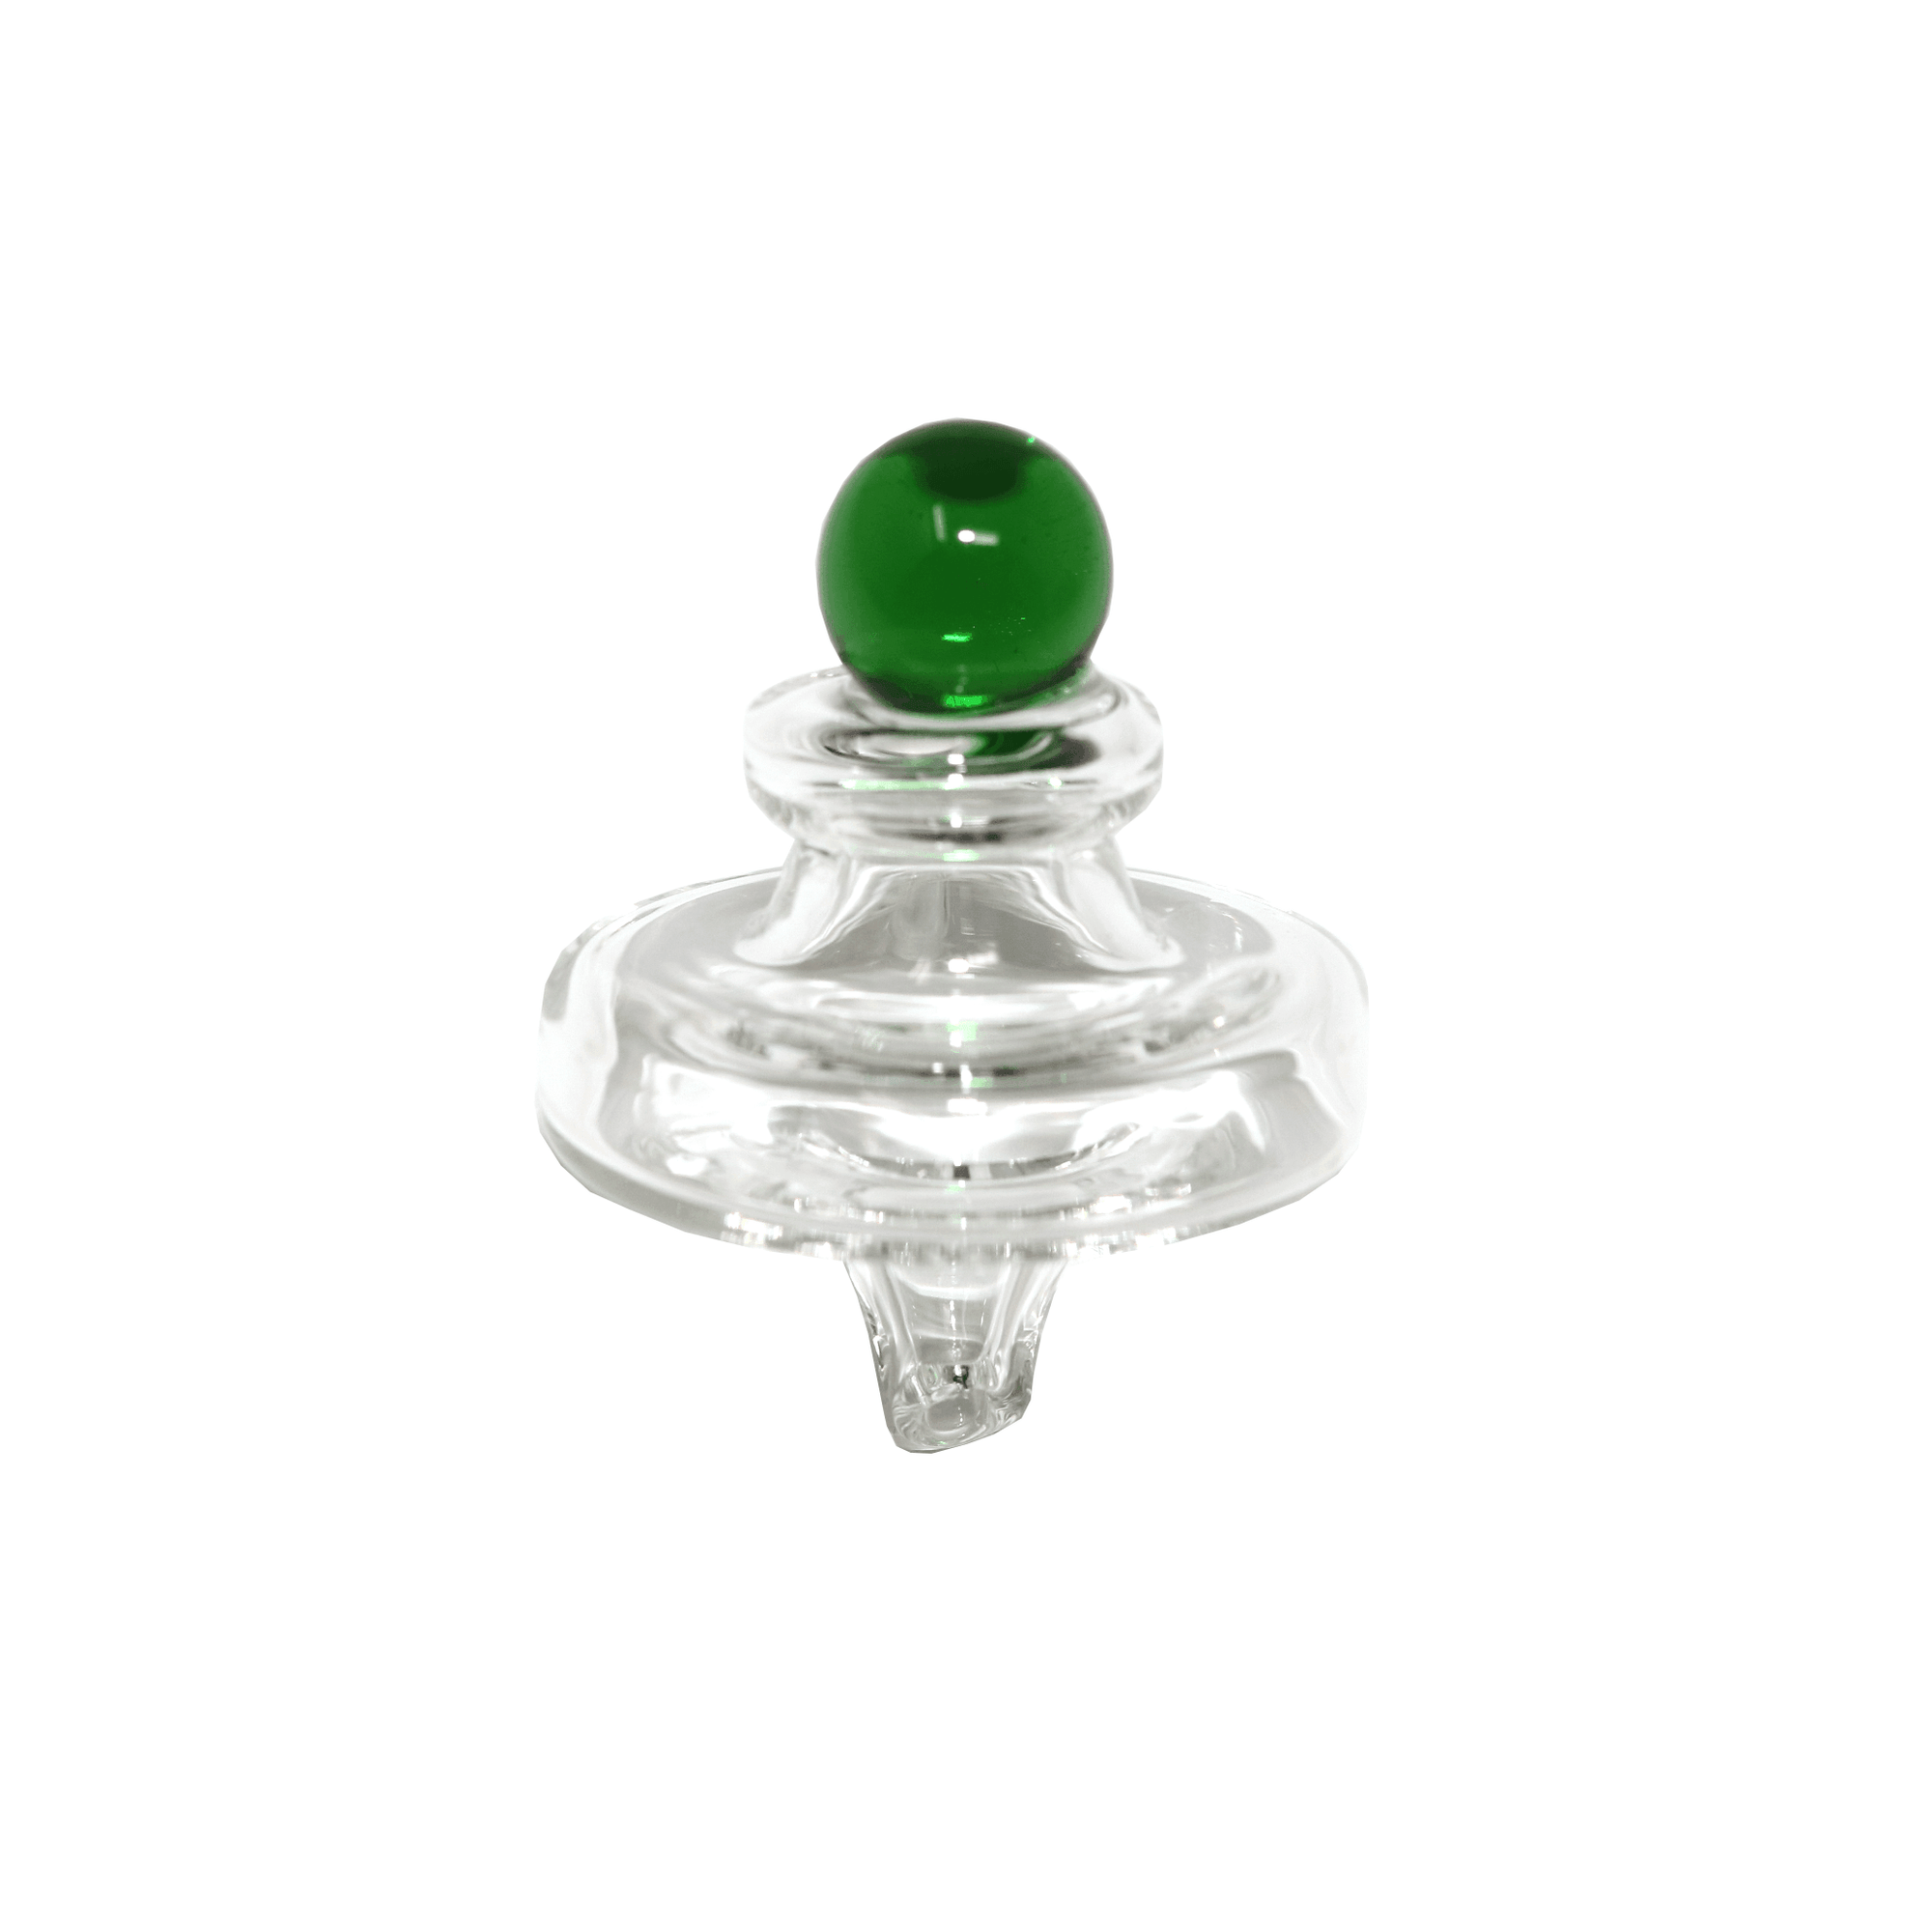 Quartz Banger Thermal Core Reactor 10mm Male With Saucer Cap | Saucer Cap View | Dabbing Warehouse